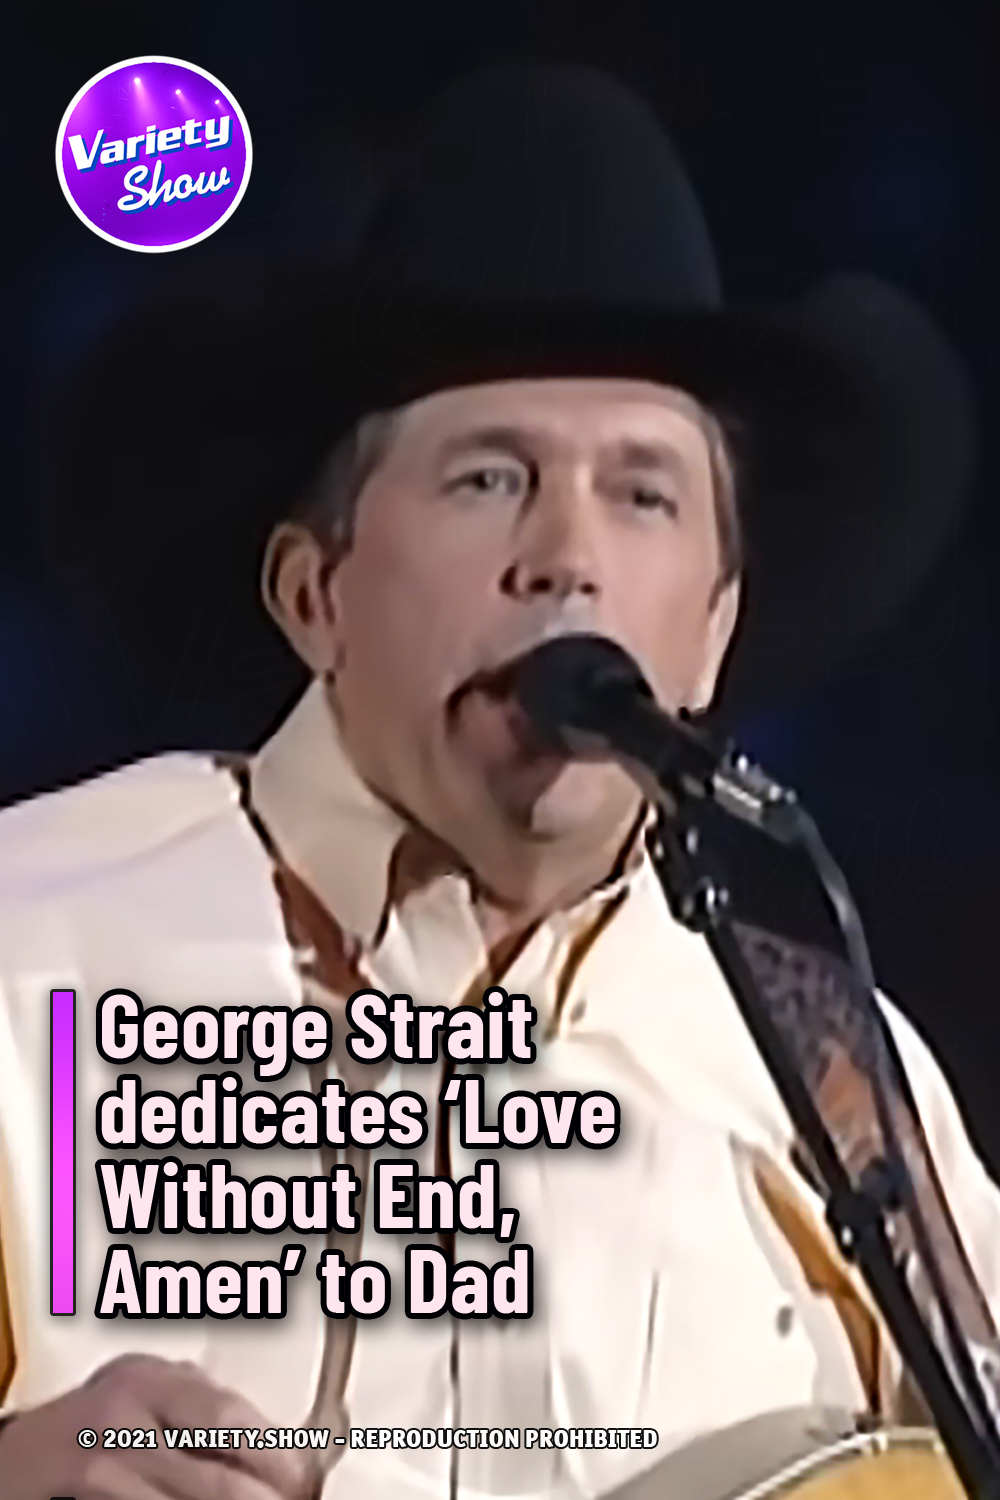 George Strait dedicates ‘Love Without End, Amen’ to Dad